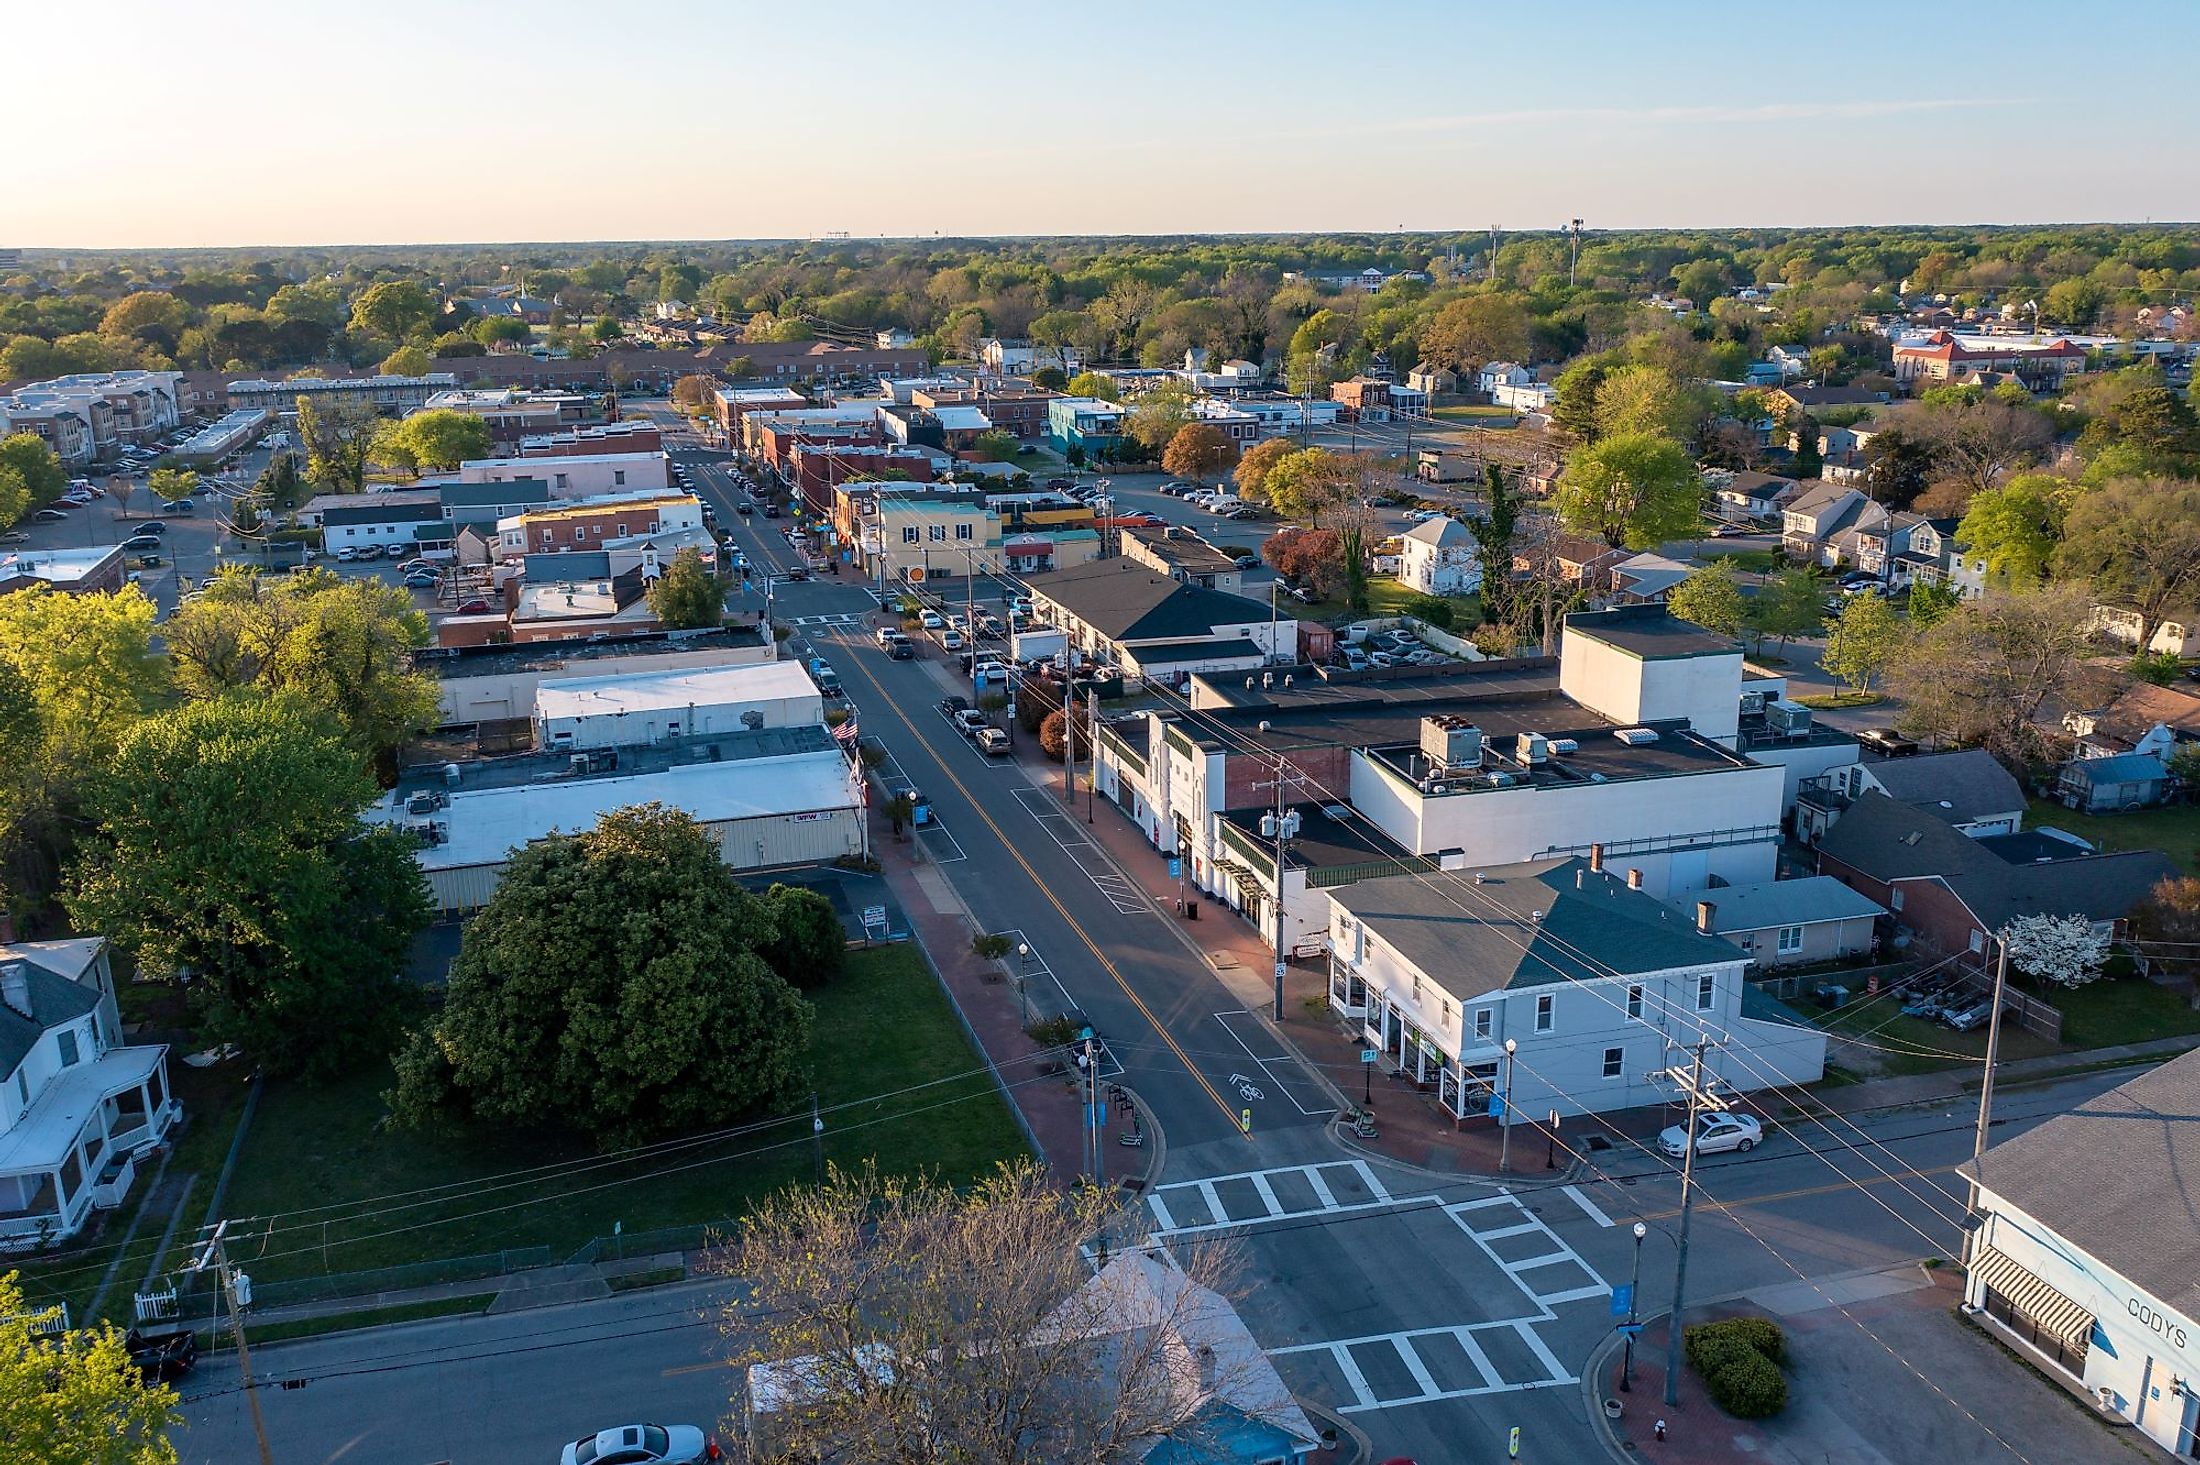 Aerial view of Phoebus National Historic District in Hampton, Virginia. Editorial credit: Kyle J Little / Shutterstock.com